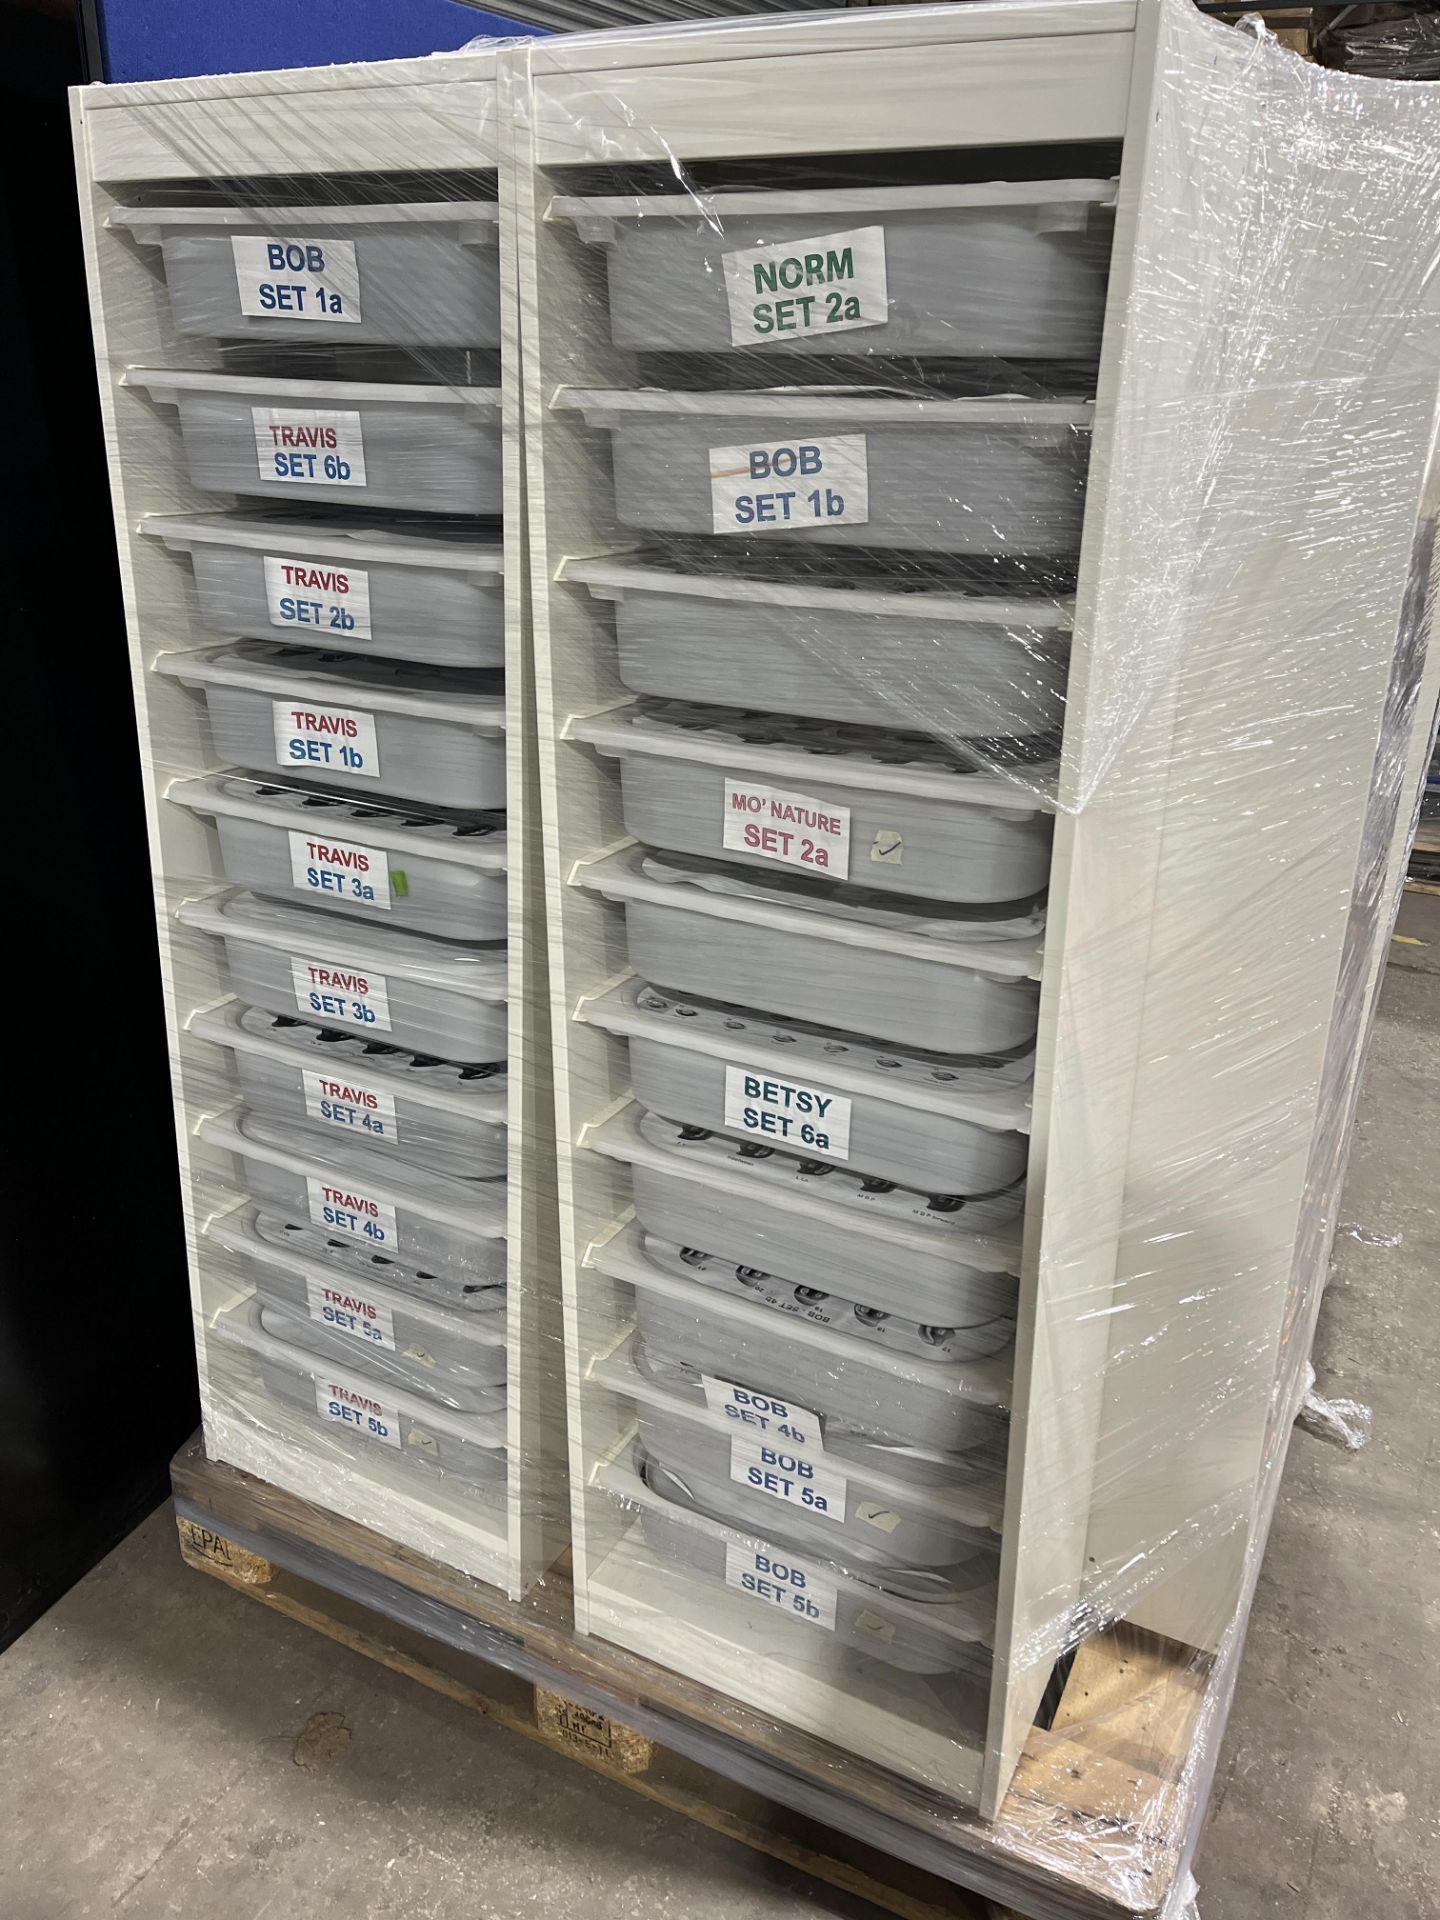 3 x Pallets of Puppets, Costumes and Accessories for TV Animation 'Norman Picklestripes' - Image 15 of 17